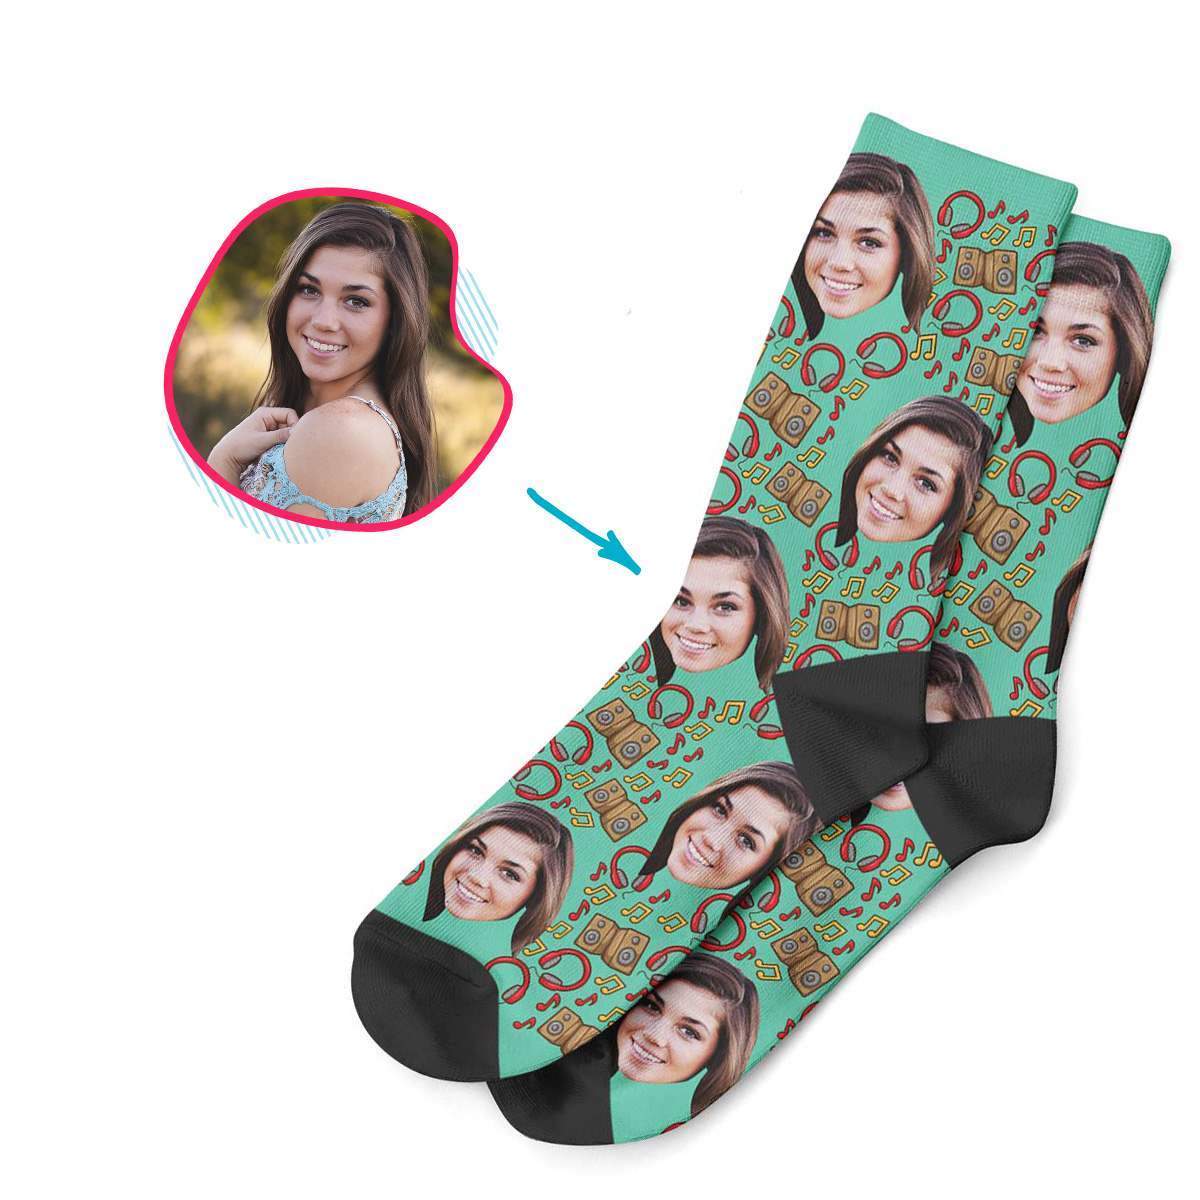 mint Music socks personalized with photo of face printed on them